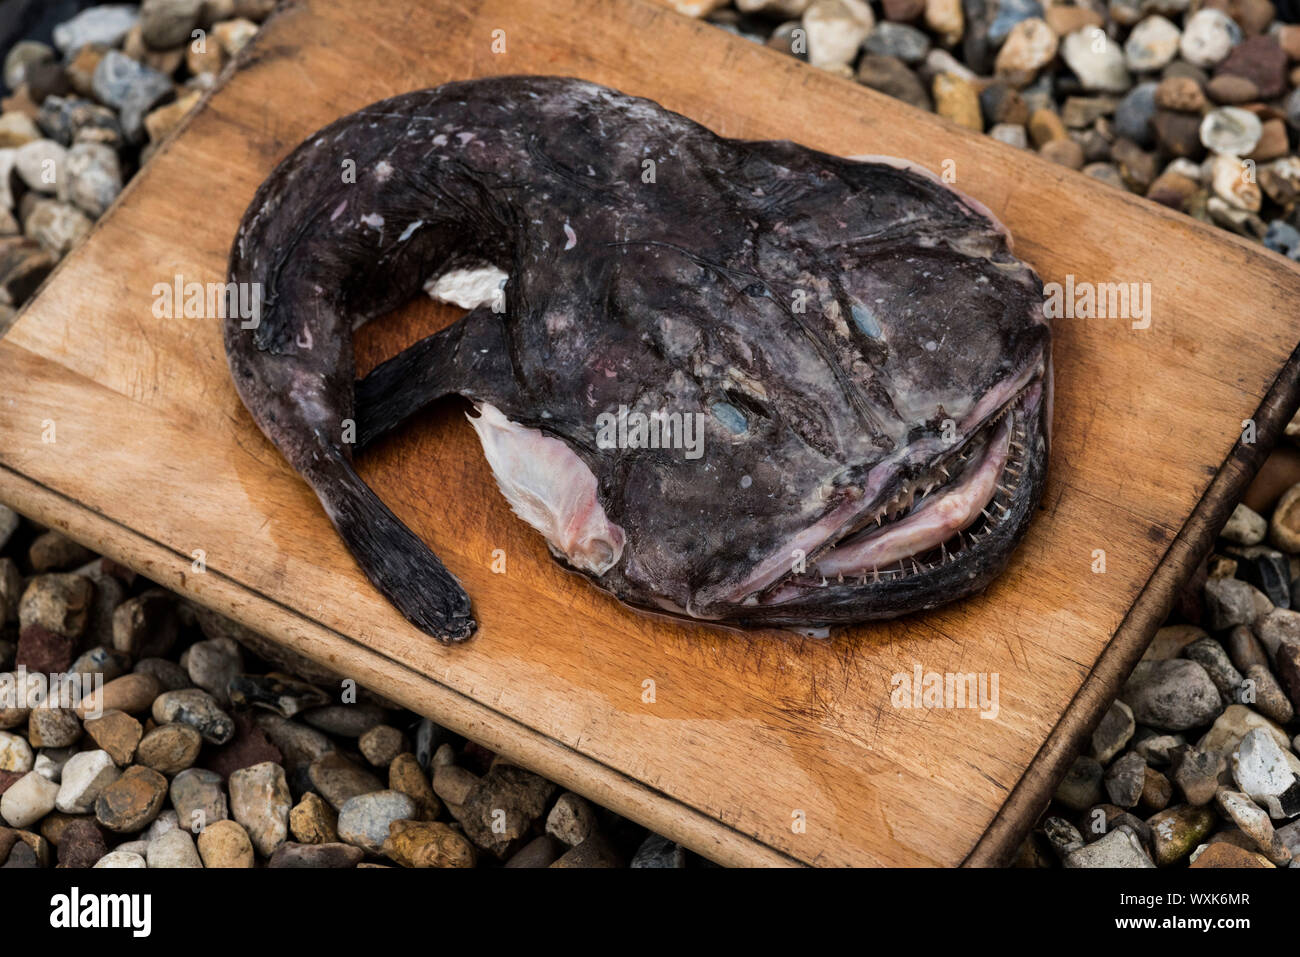 A Monkfish ( Angler fish ), Lophius piscatorius, sits on a chopping board surrounded by beach pebbles. Stock Photo